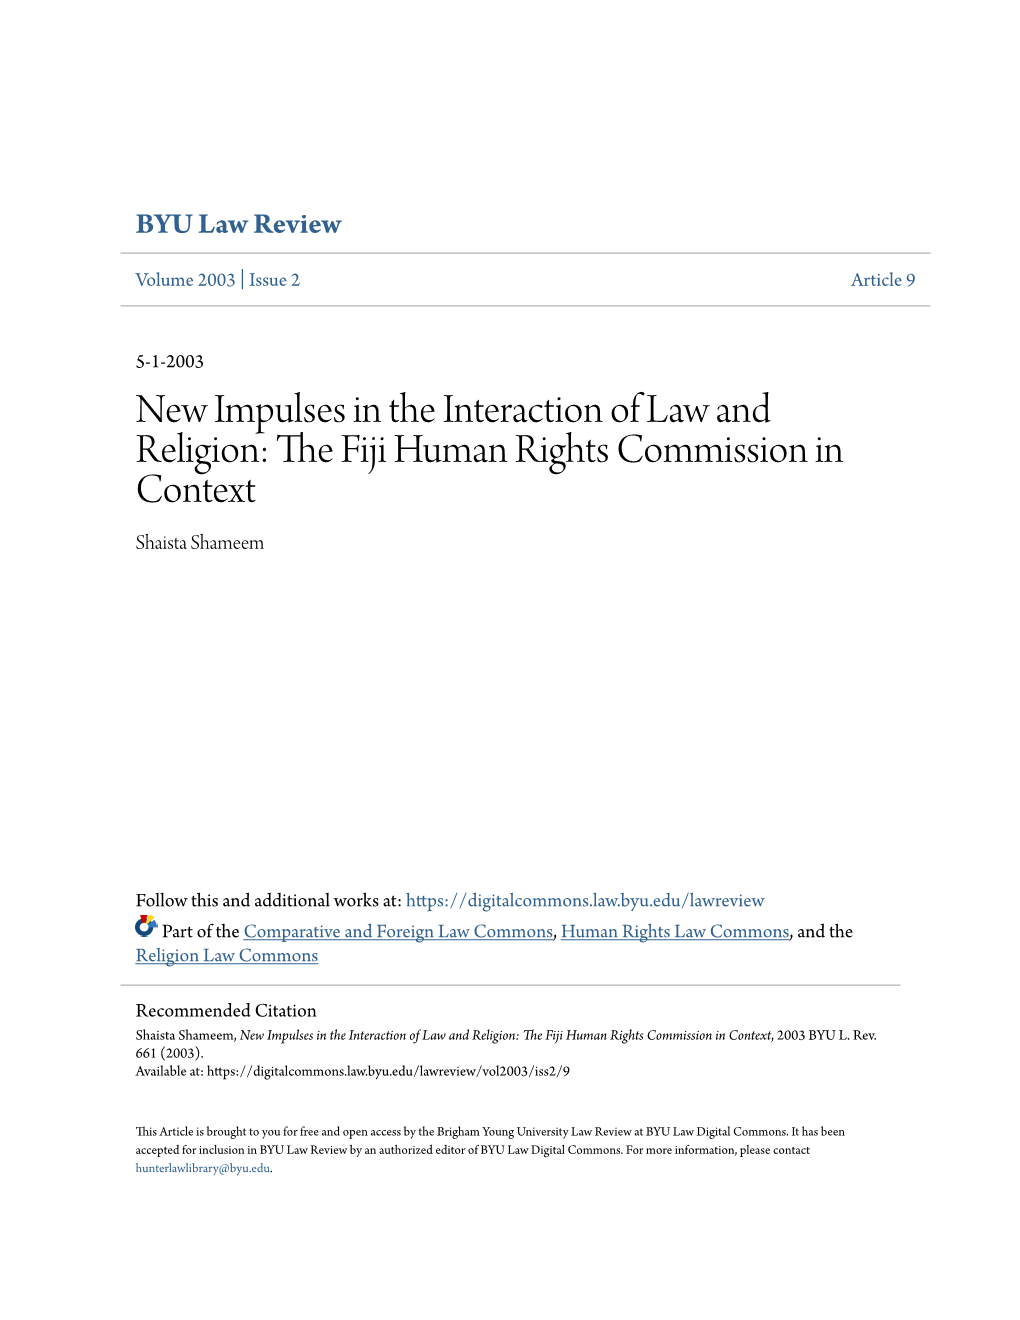 New Impulses in the Interaction of Law and Religion: the Fiji Human Rights Commission in Context, 2003 BYU L